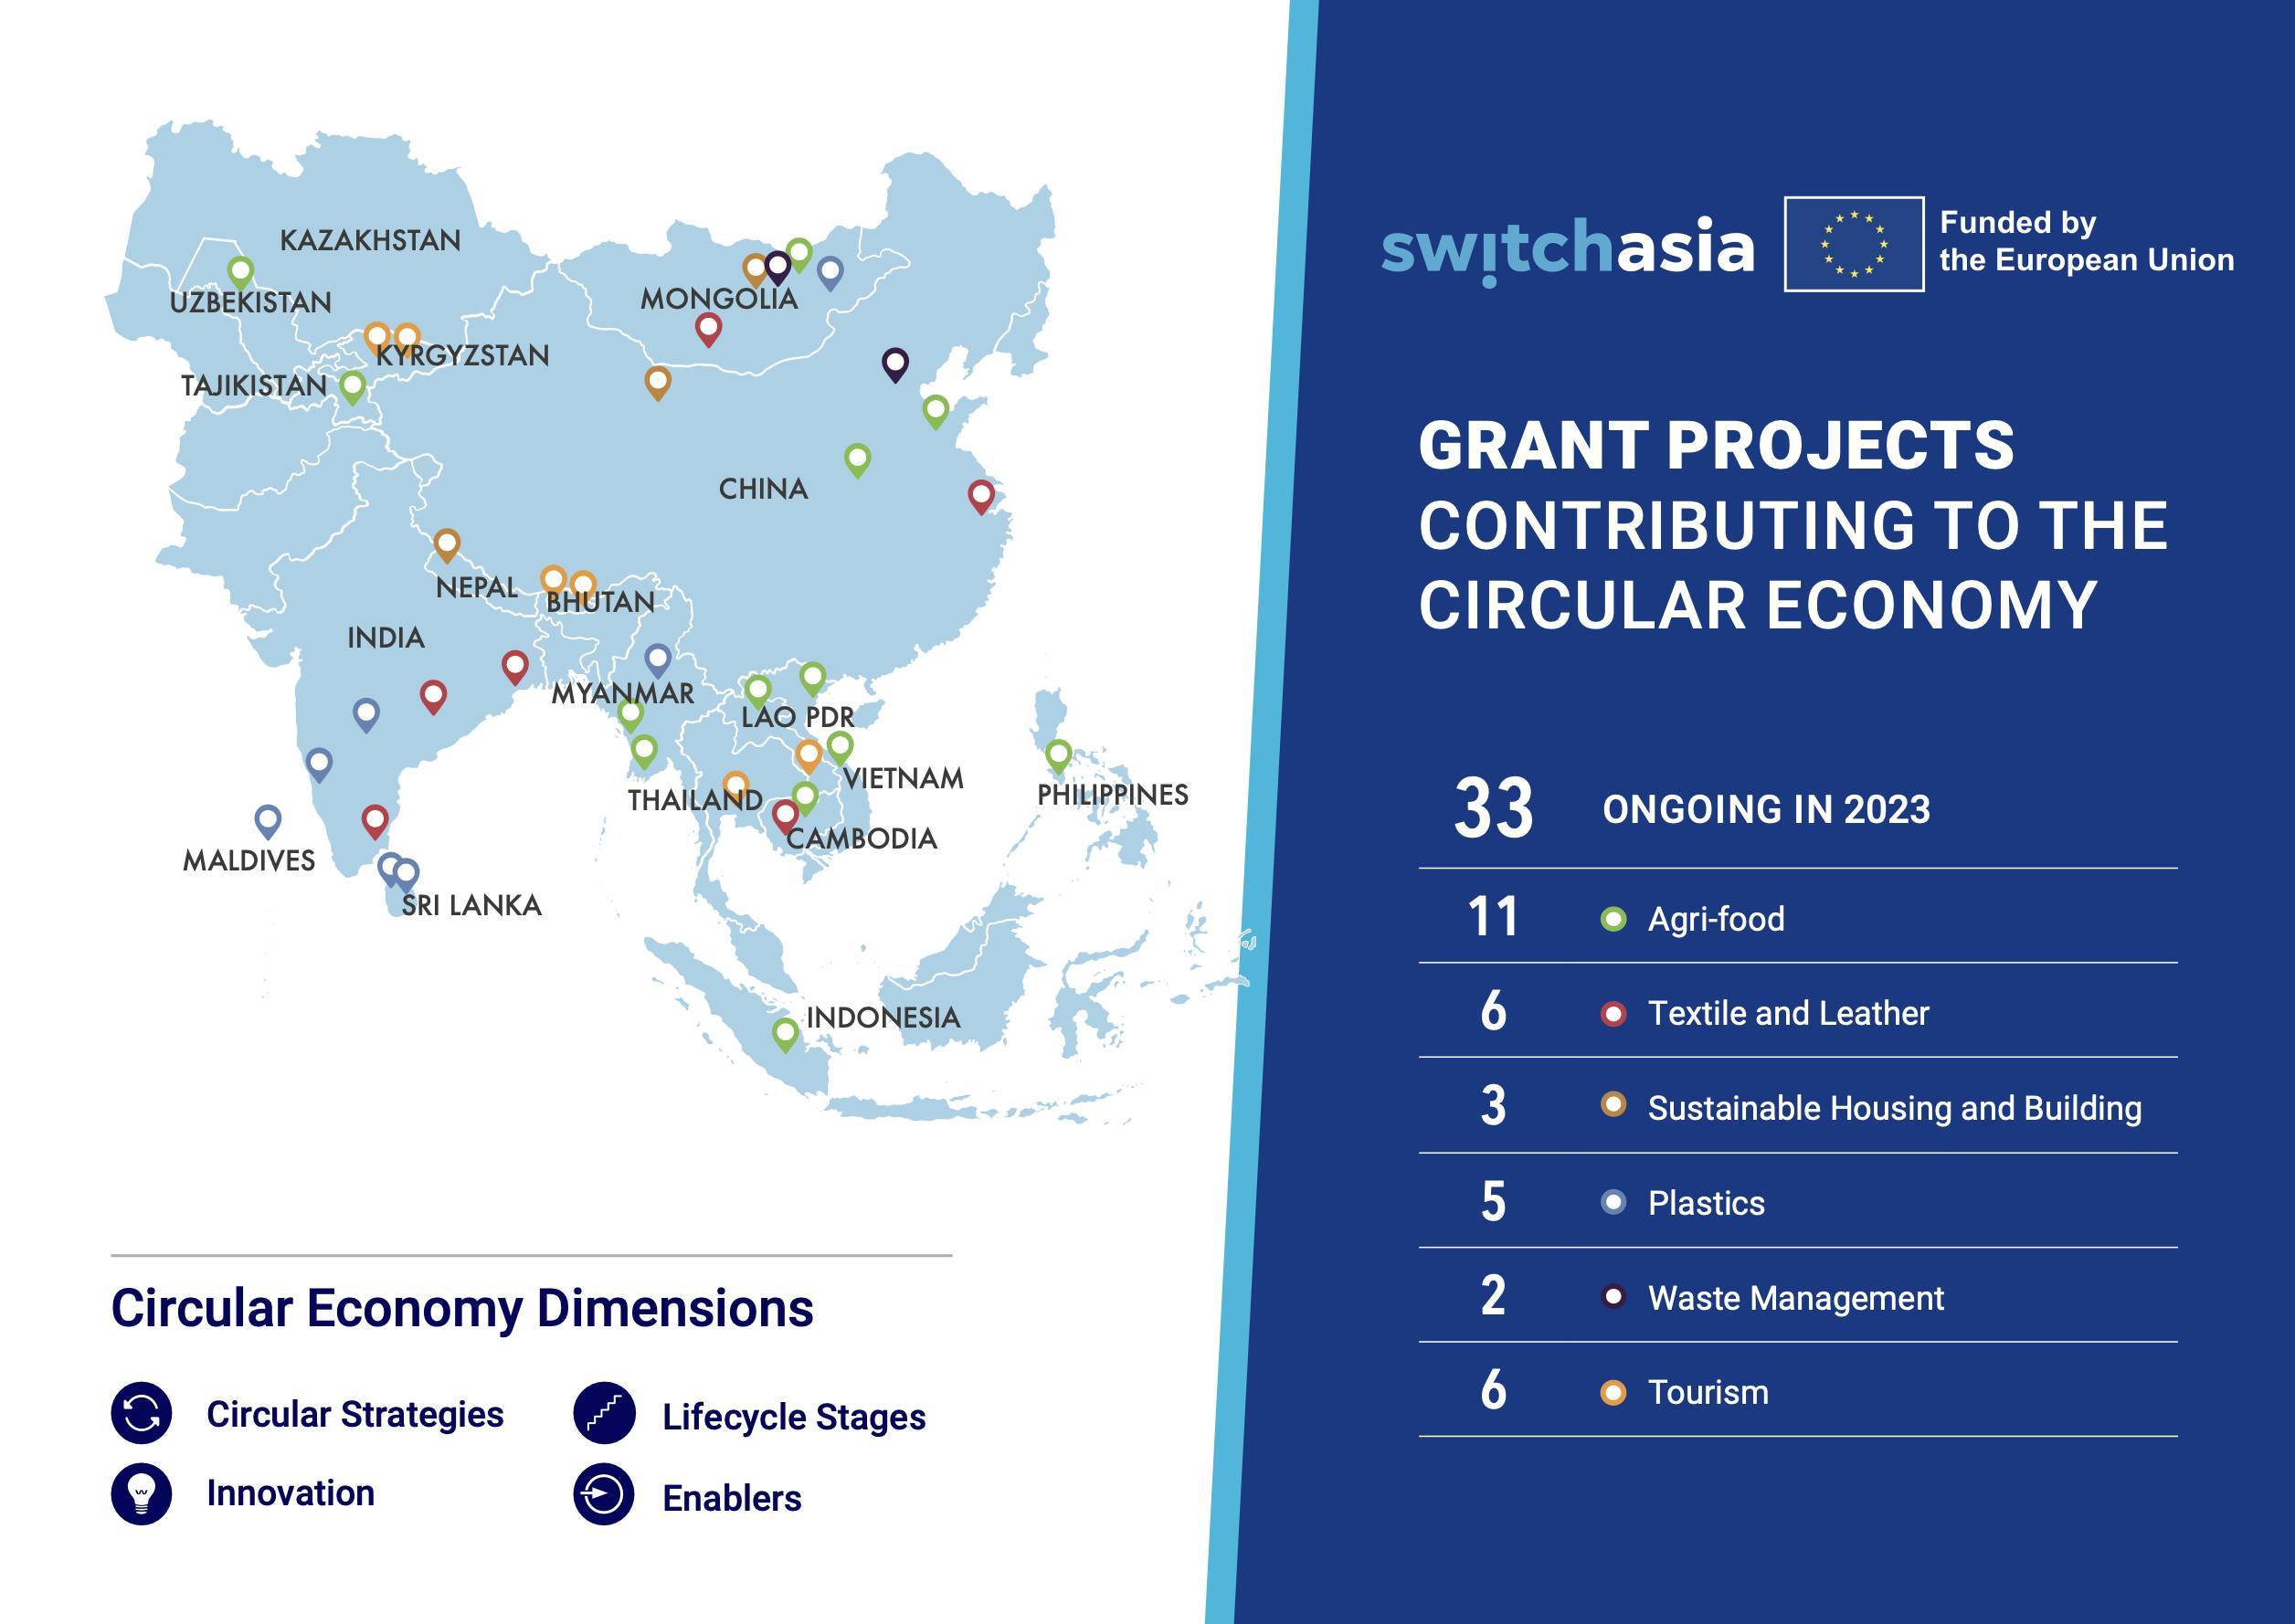 SWITCH-Asia Grant Projects Contributing to the Circular Economy